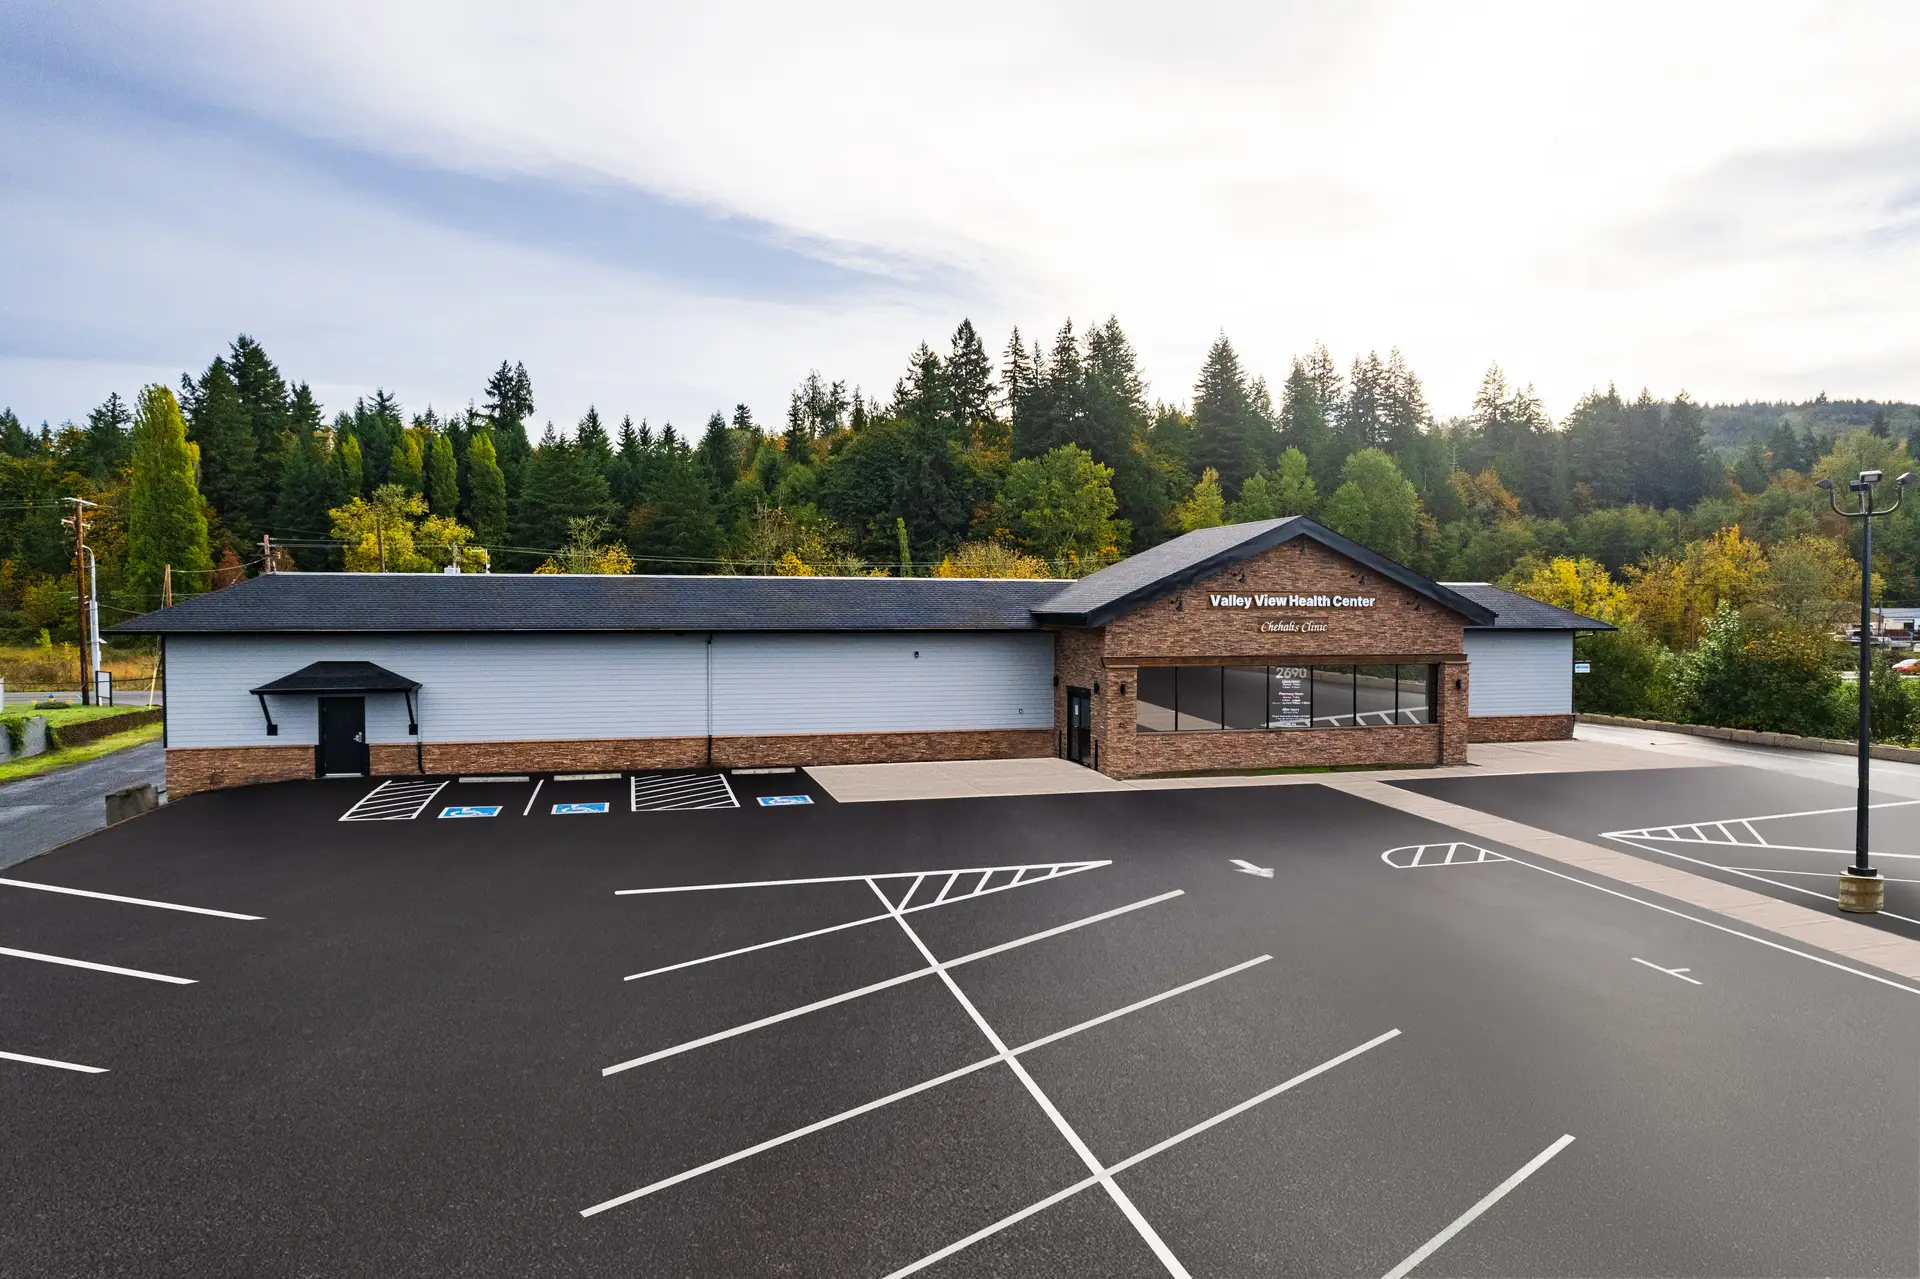 Project Management for Chehalis Clinic Remodel